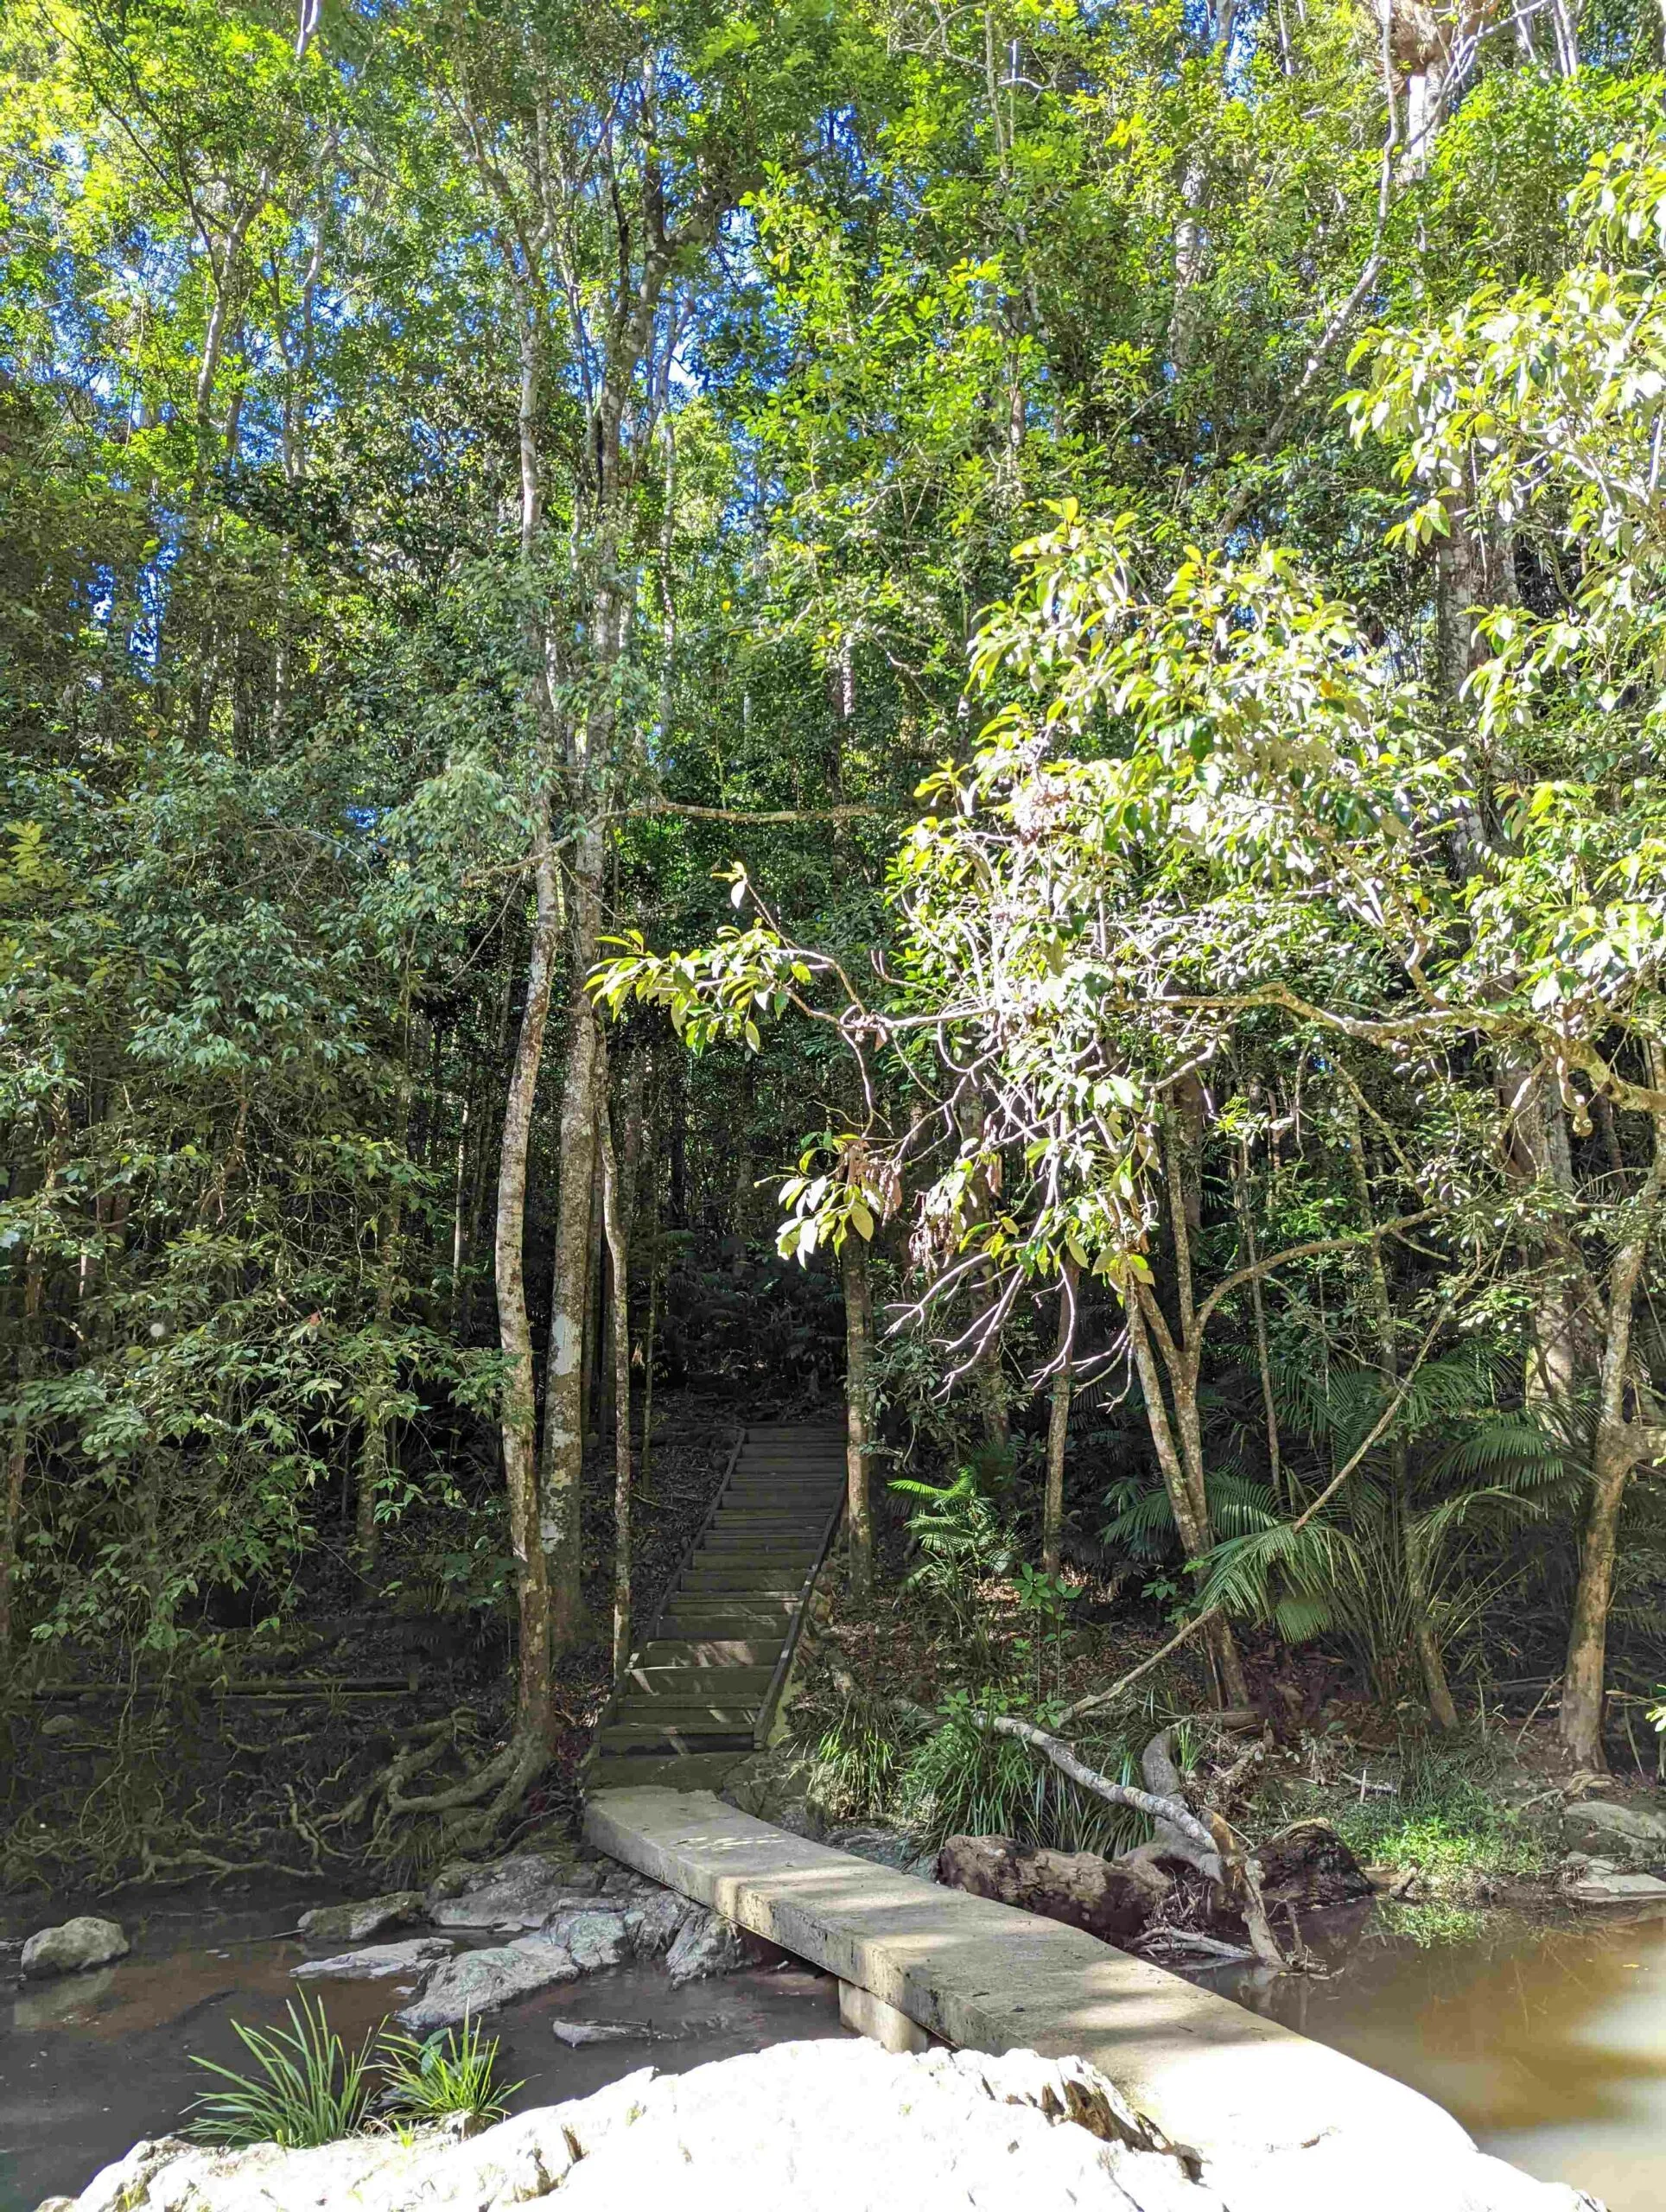 A cement pathway lead to a stone staircase at the back of the creek crossing. Tall trees surround the path way and staircase.